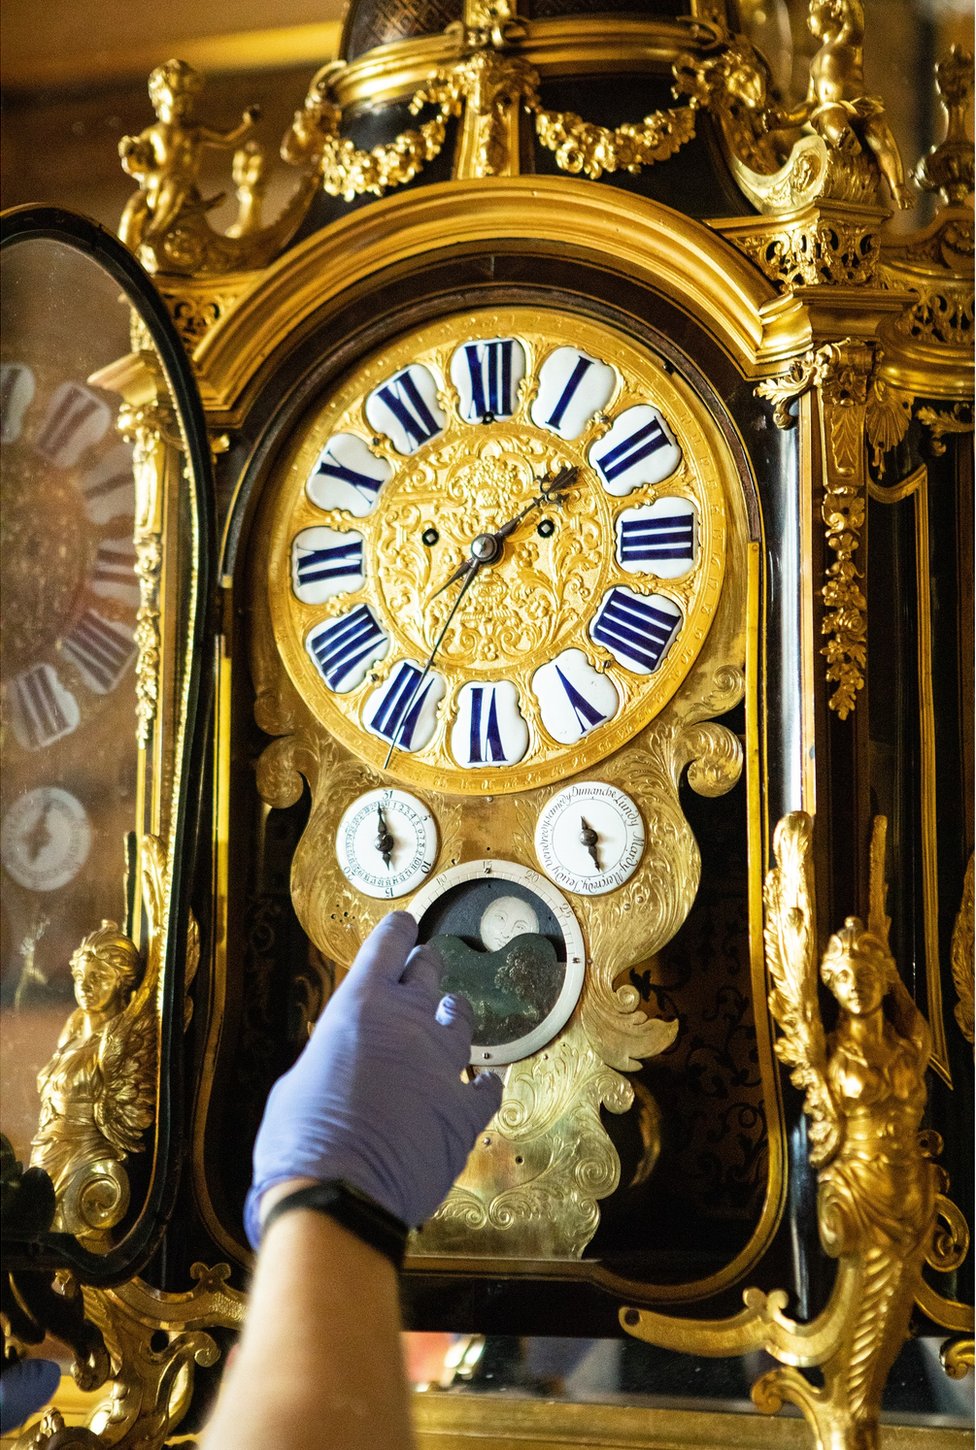 A close-up of Fjodor changing the time on a gold-decorated clock with a dial for moon changes